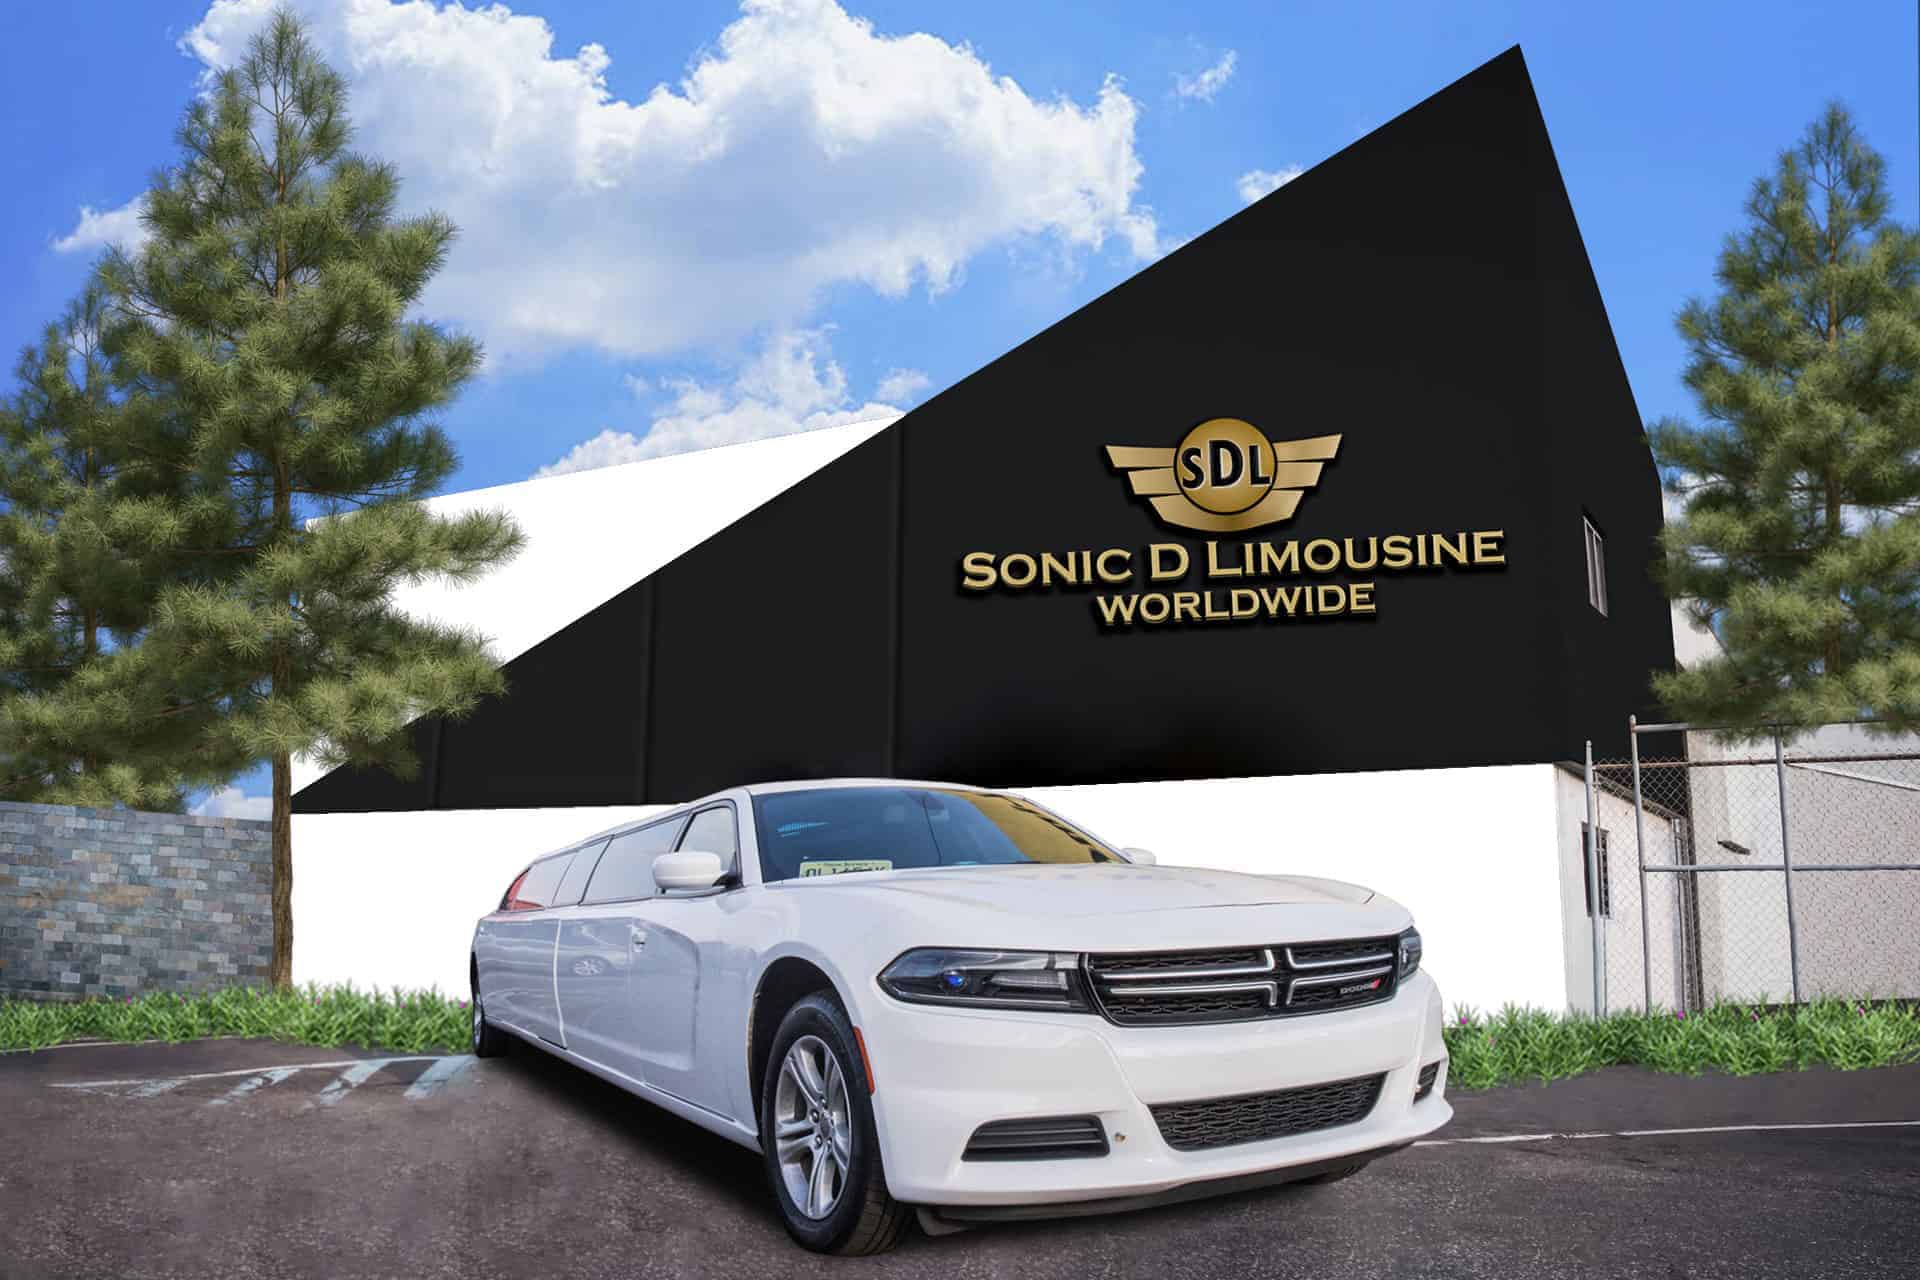 Dodge Charger Limo with BG of Sonic D Limousine